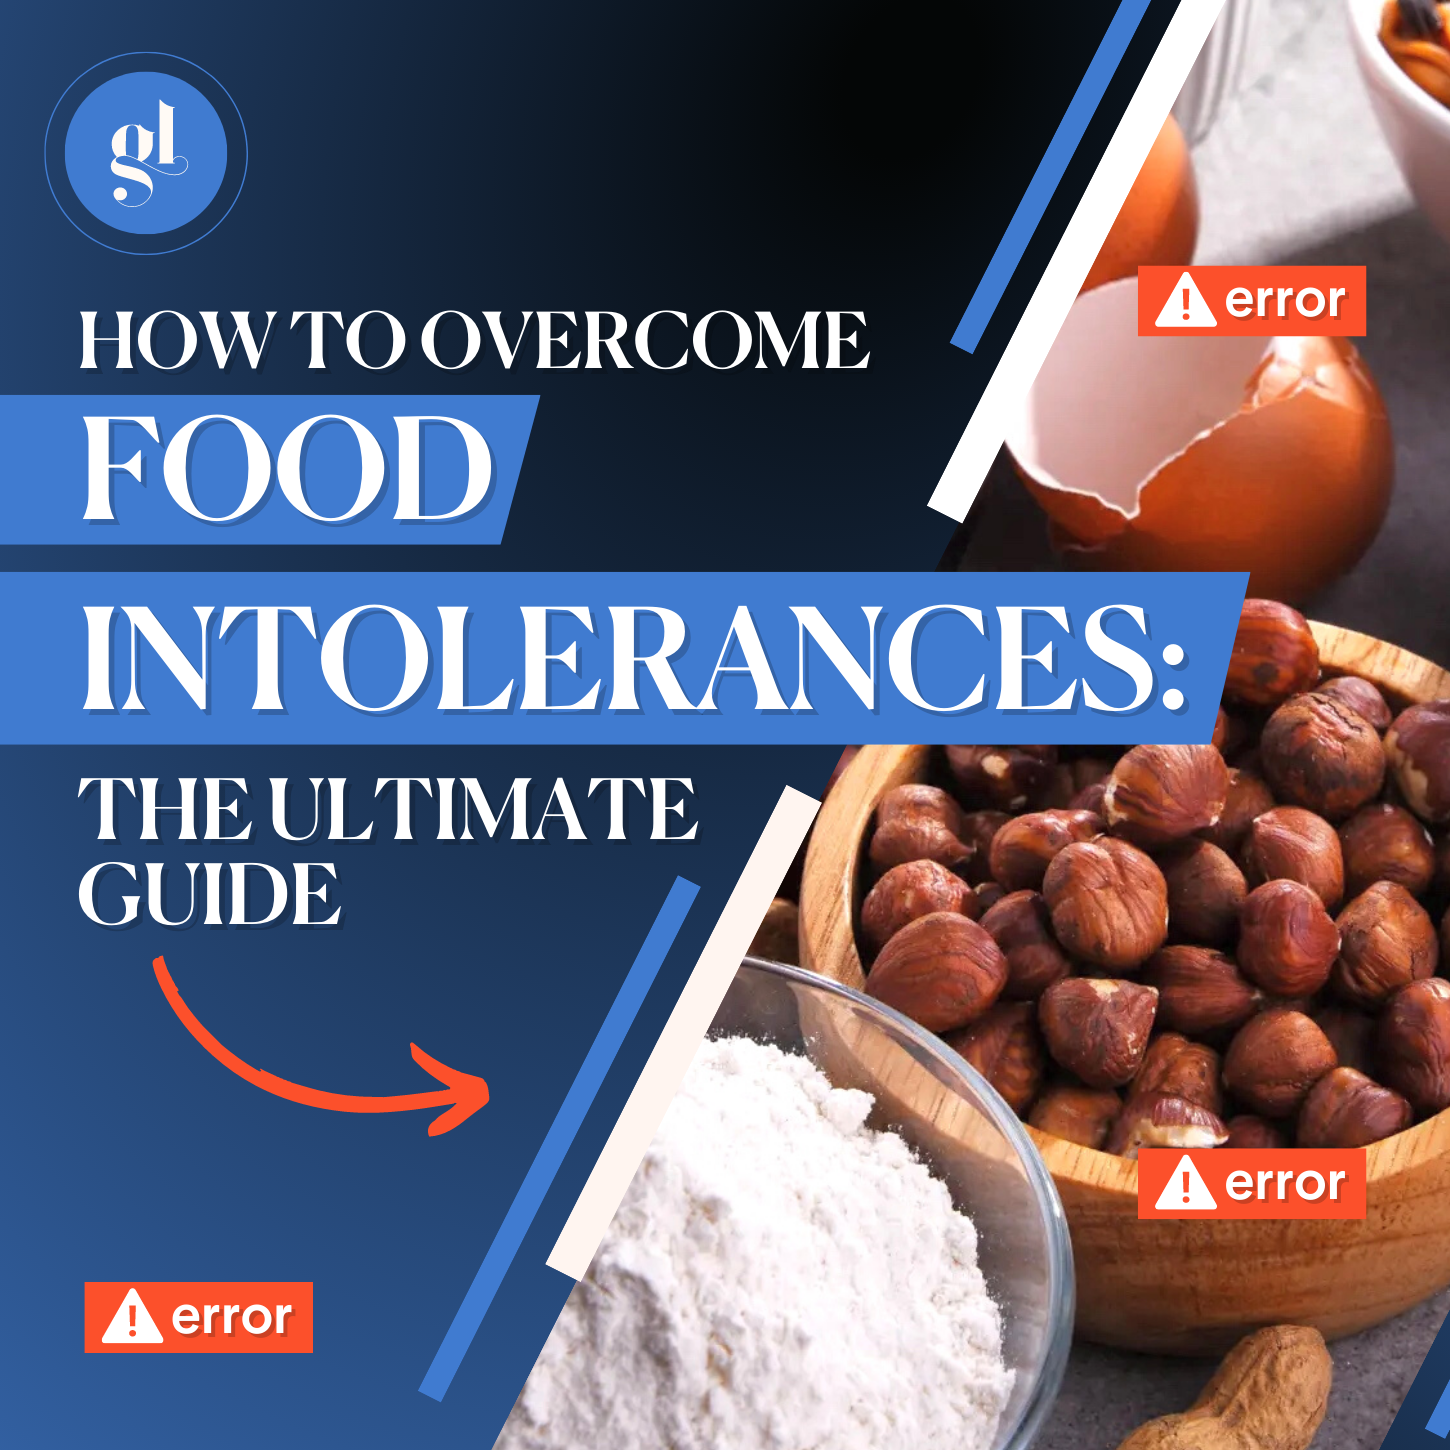 How to Overcome Food Intolerances: The Ultimate Guide